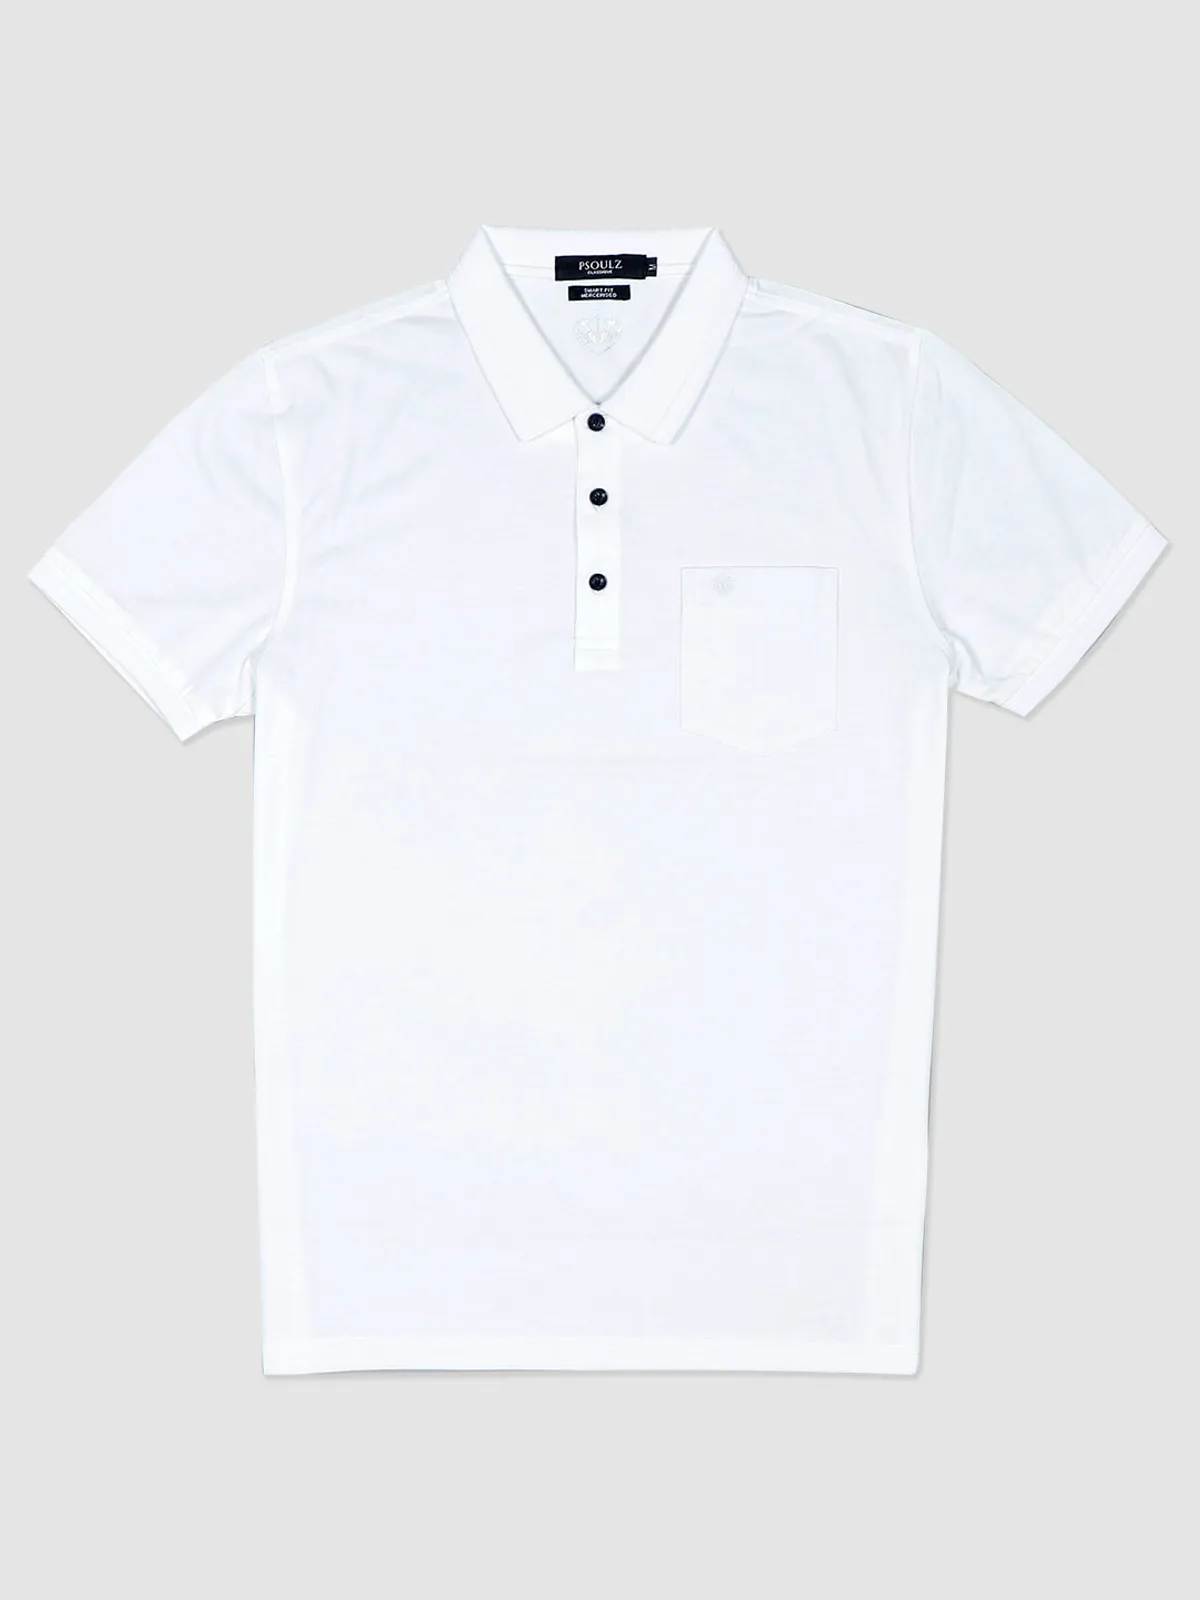 Psoulz white solid casual polo t-shirt